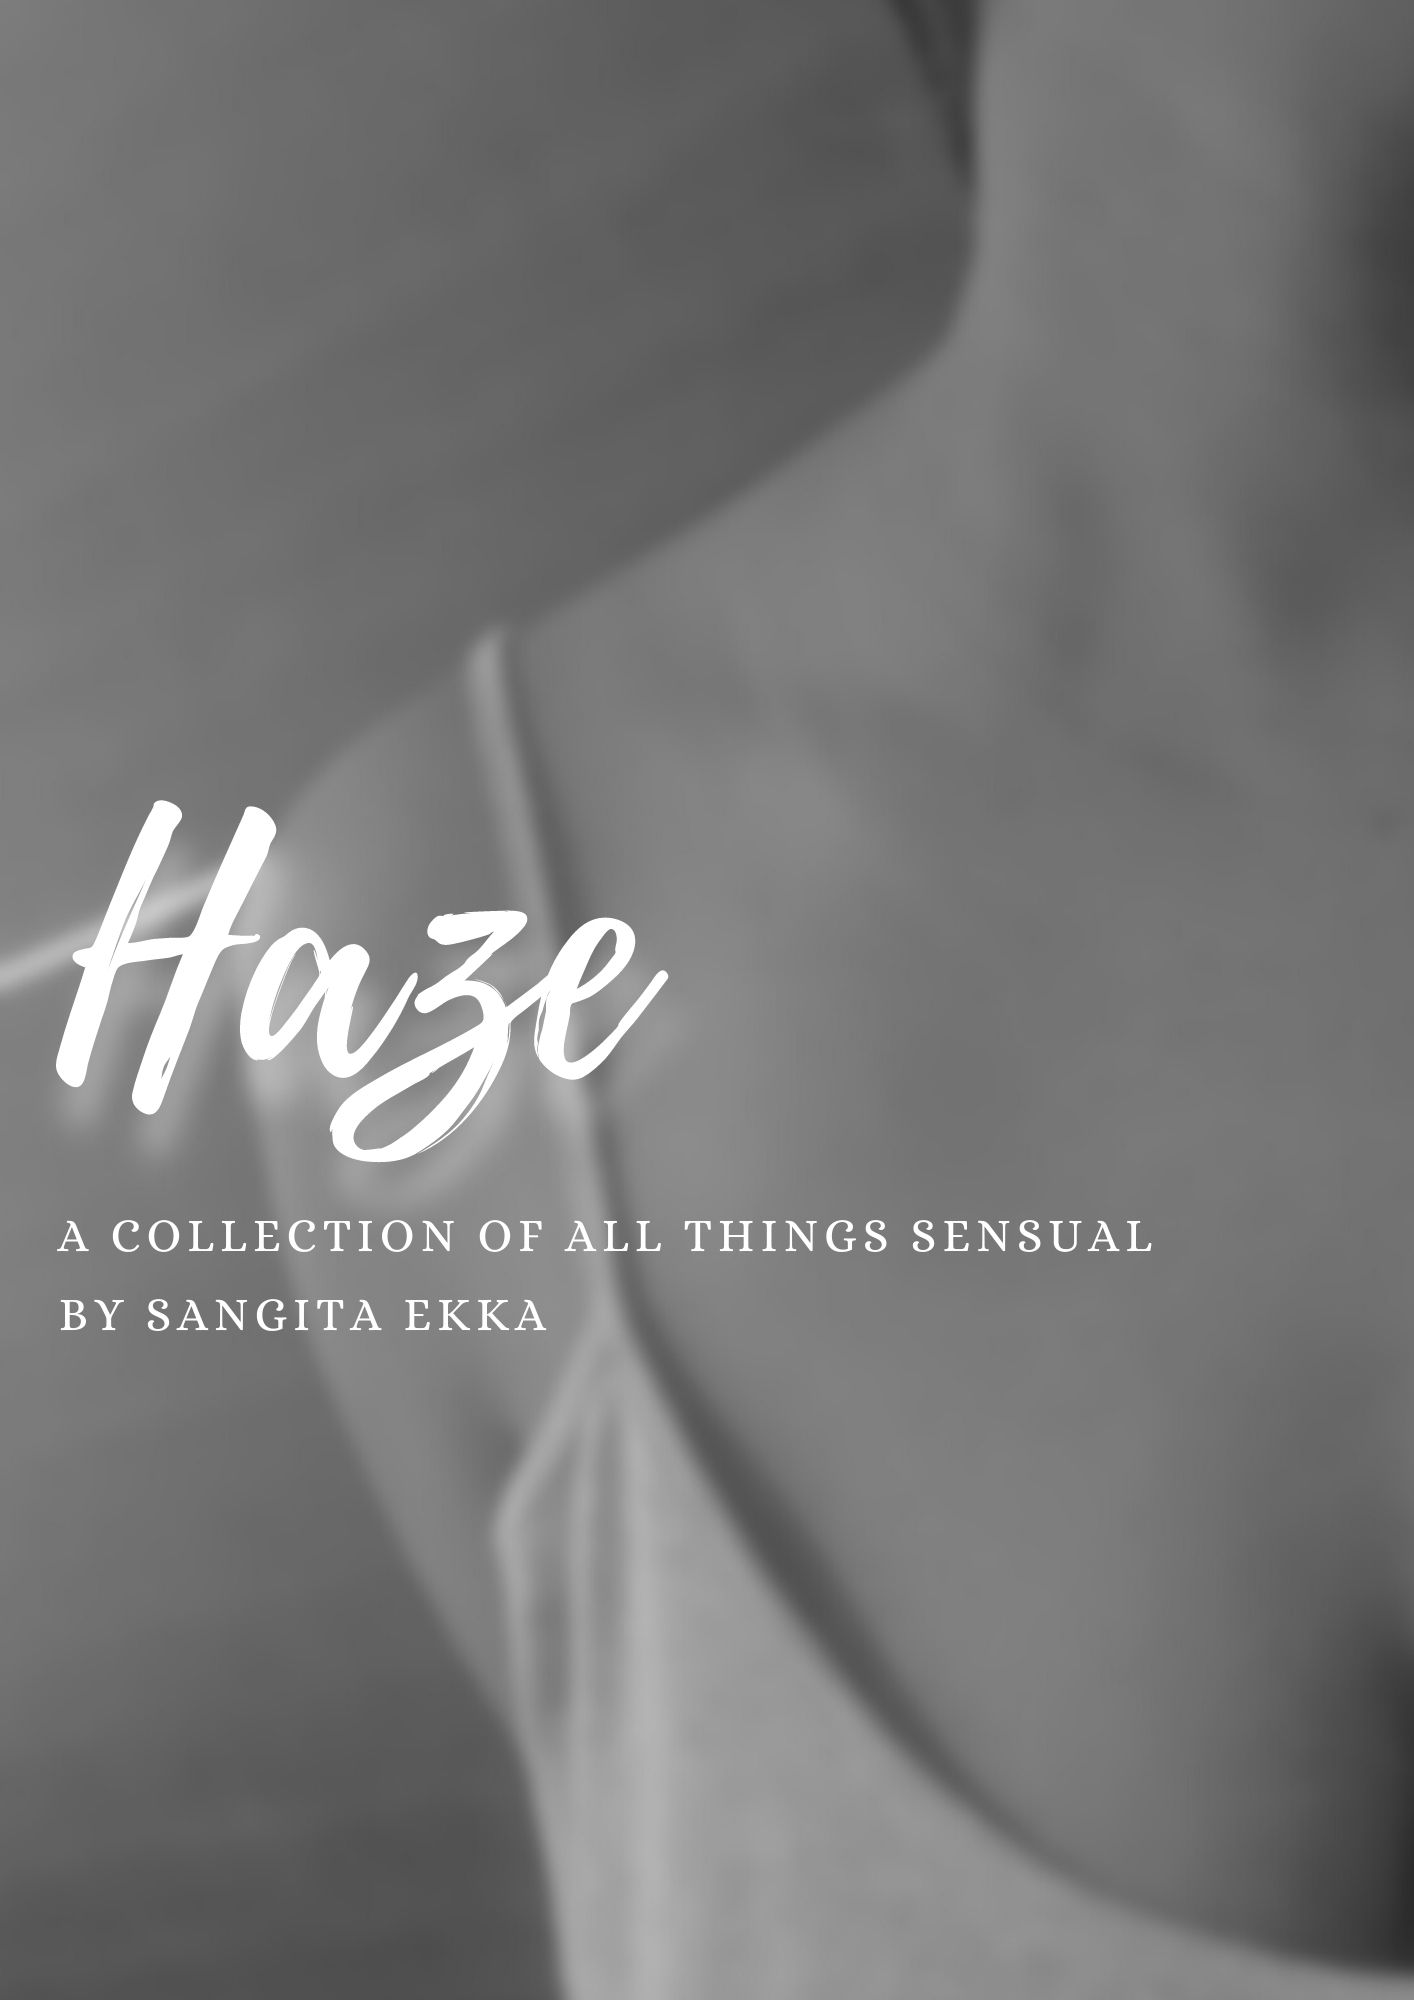 Haze - a collection of poems and artworks.